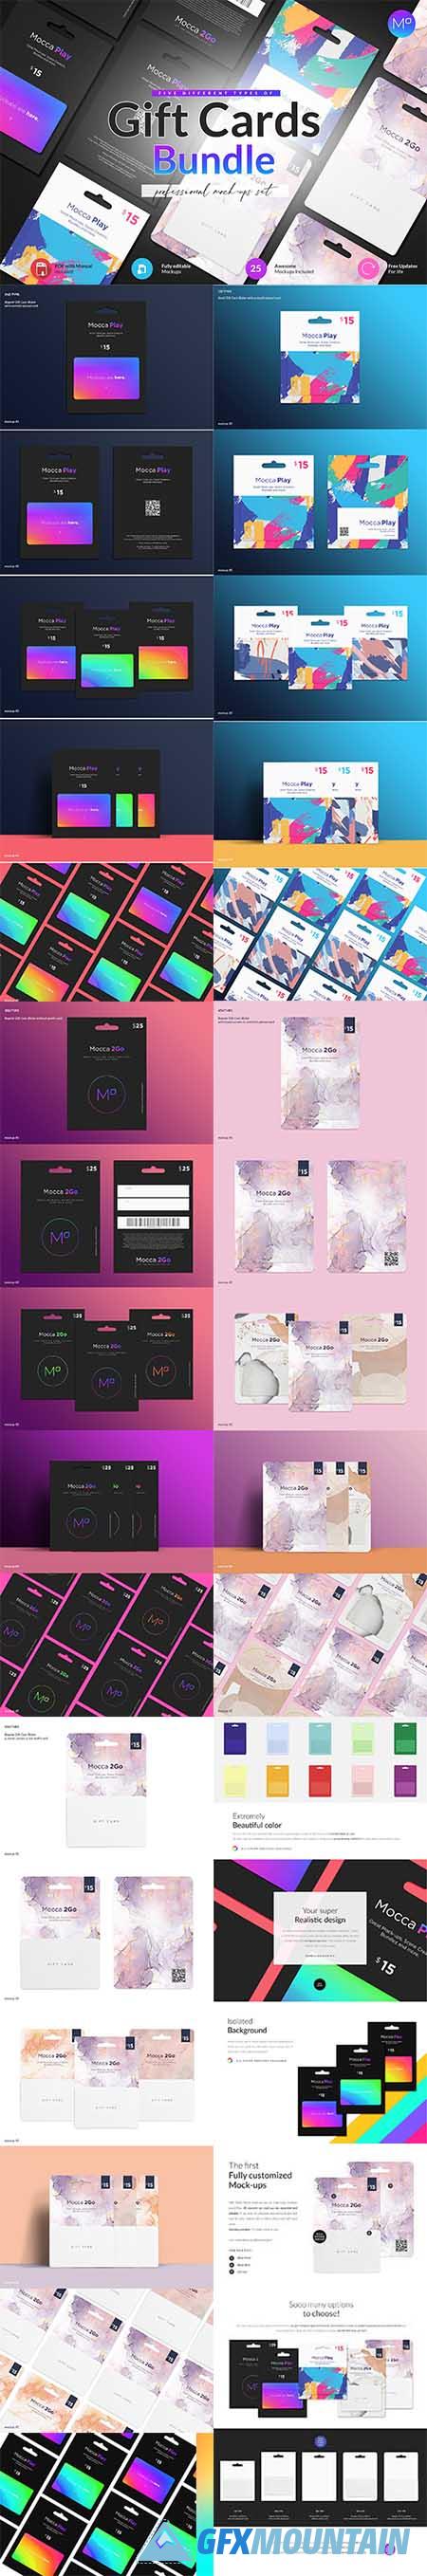 Gift Cards 5 Top Types 25xMockups 6258039